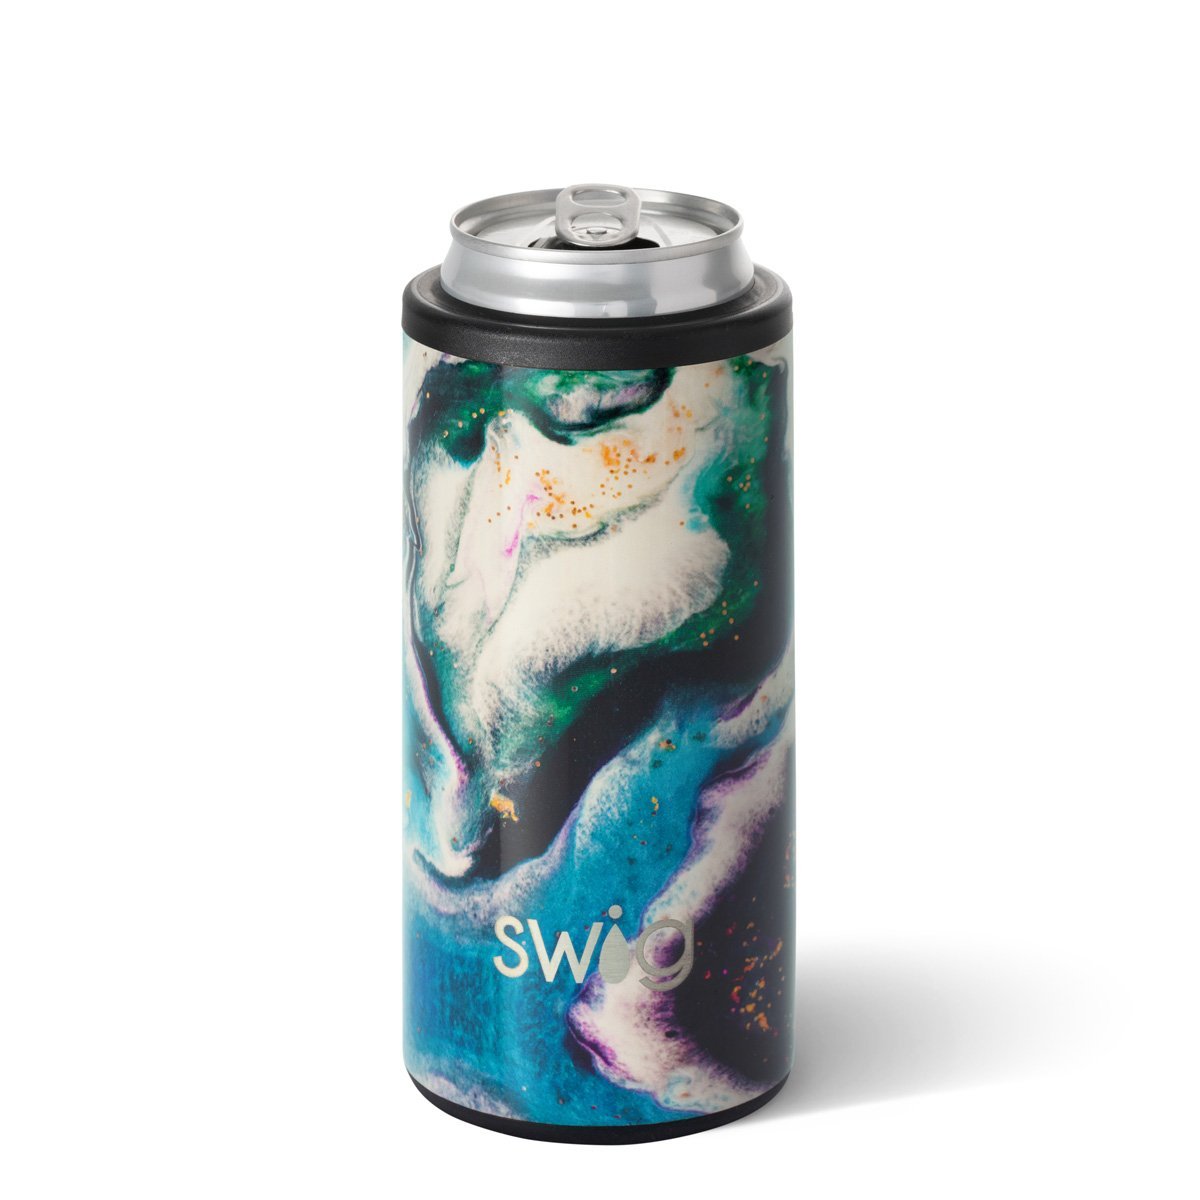 Swig Life Can & Bottle Cooler 12 oz. - Personalization Available